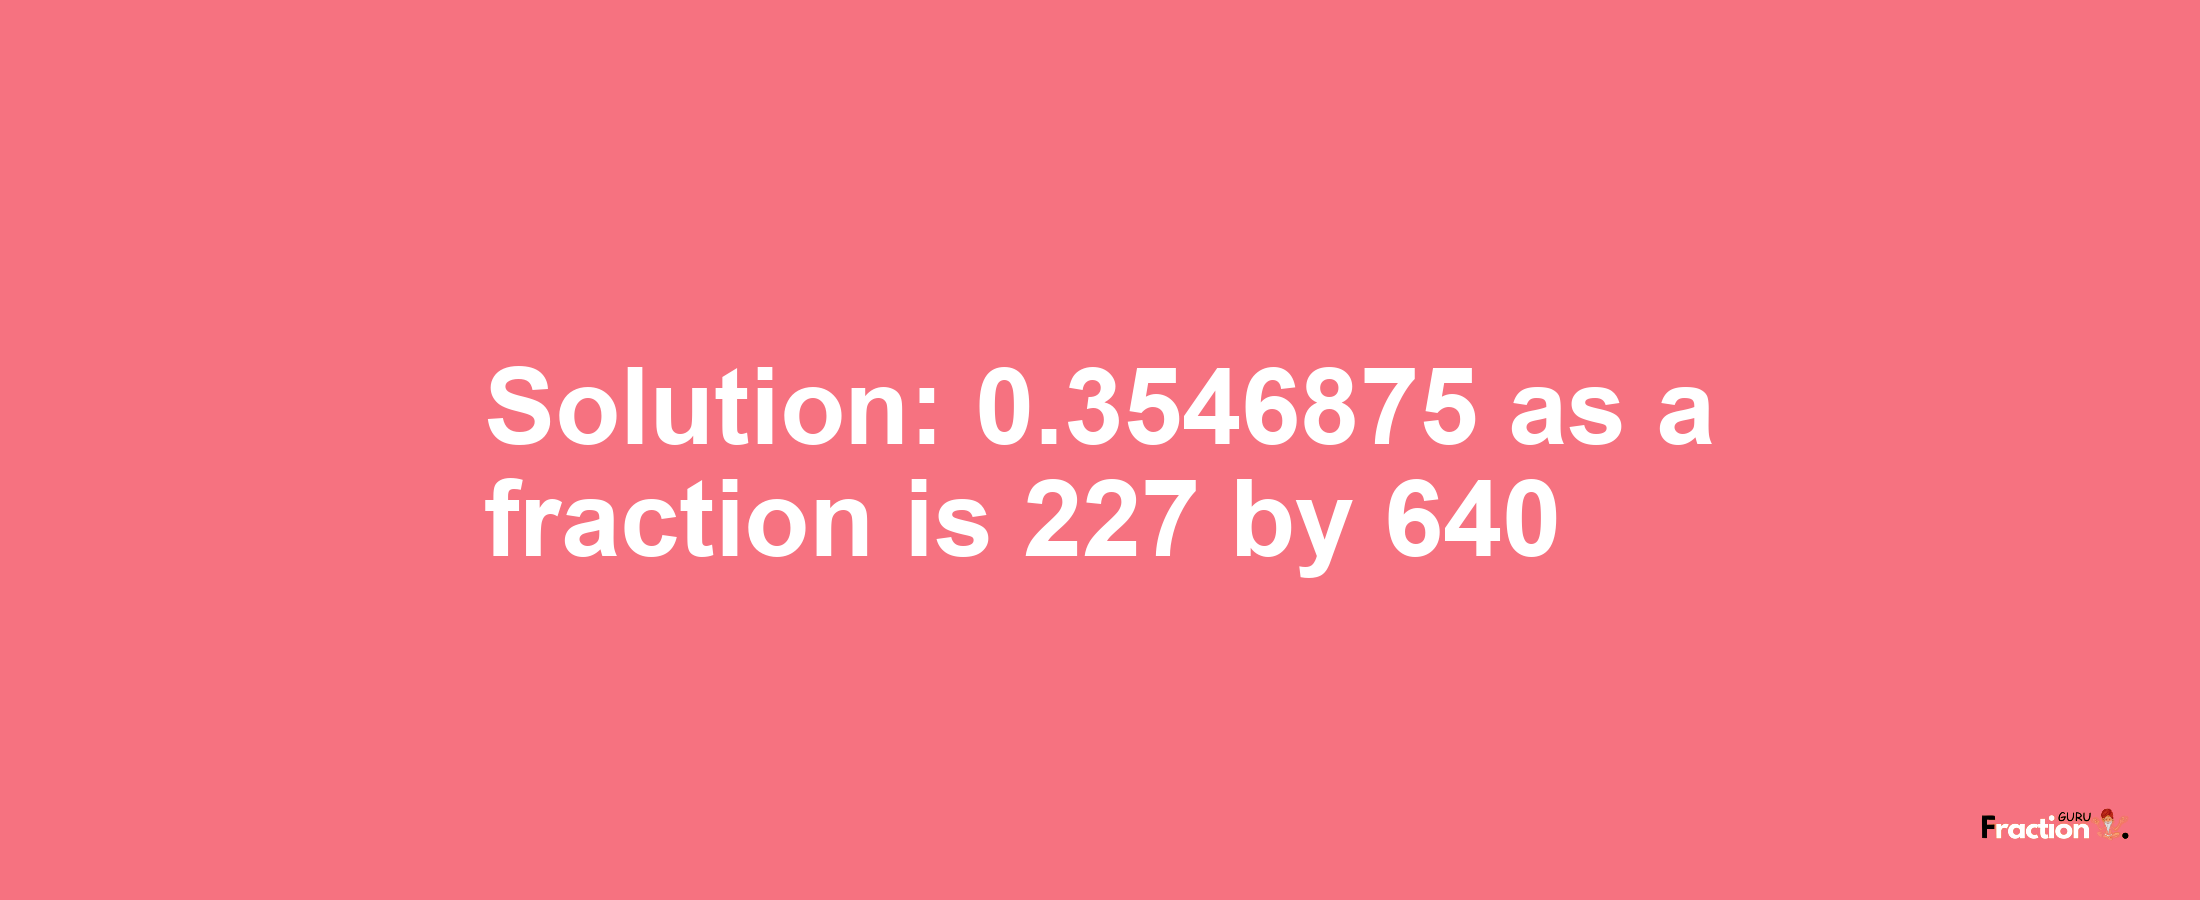 Solution:0.3546875 as a fraction is 227/640